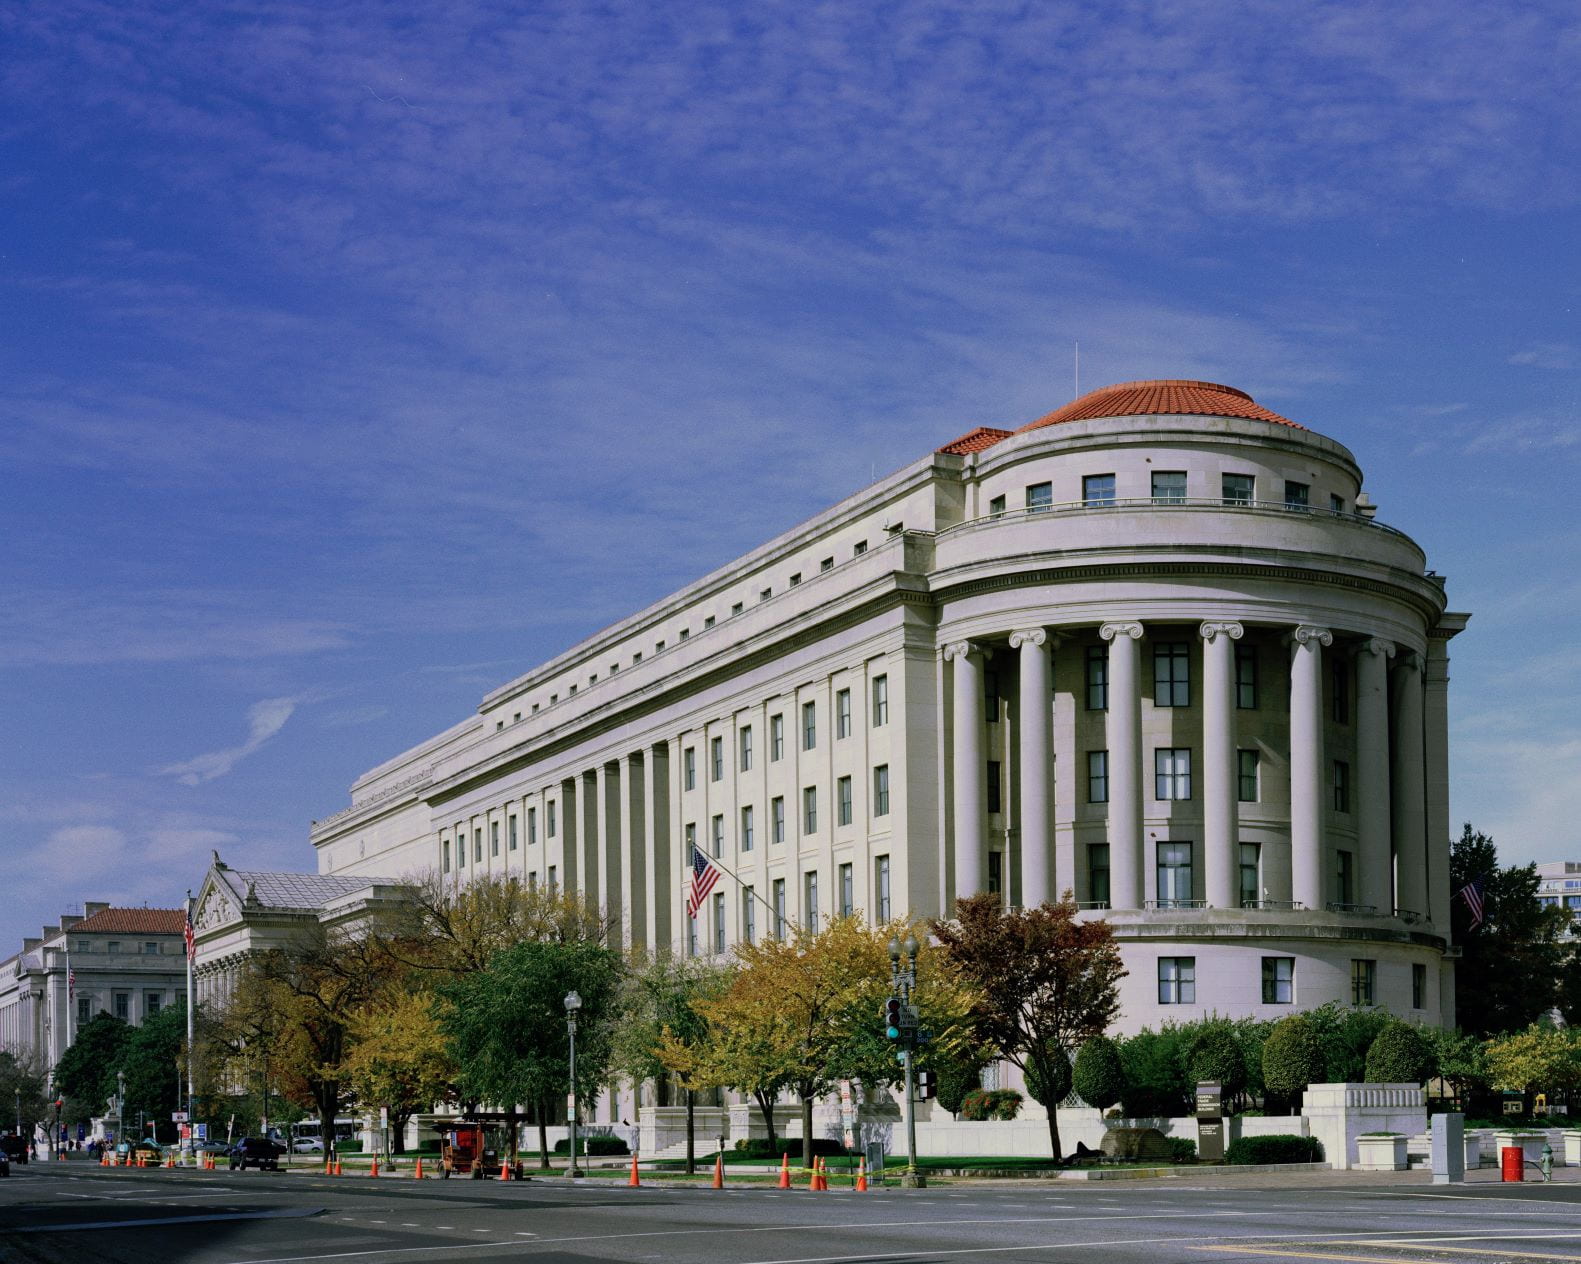 Federal Trade Commission headquarters in Washington, D.C.